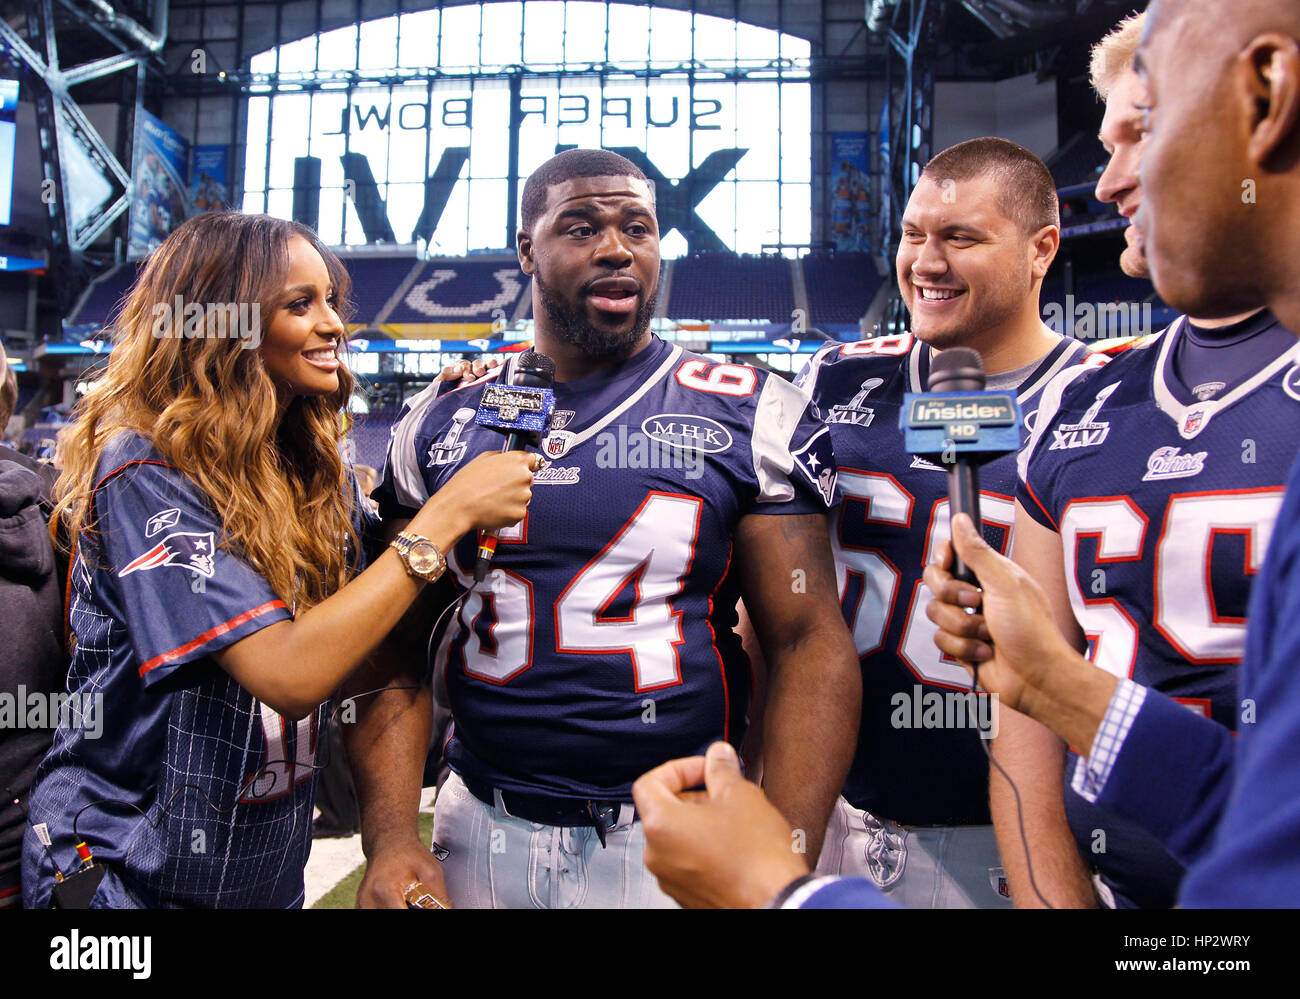 Singer Ciara, left, interviews New England Patriot players, Donald Thomas (64), Matt Kopa (68) and Nick McDonald (65) who shows off a Madonna bra at the Super Bowl XLVI Media Day in Indianapolis, Indiana on January 31, 2012. Francis Specker Stock Photo